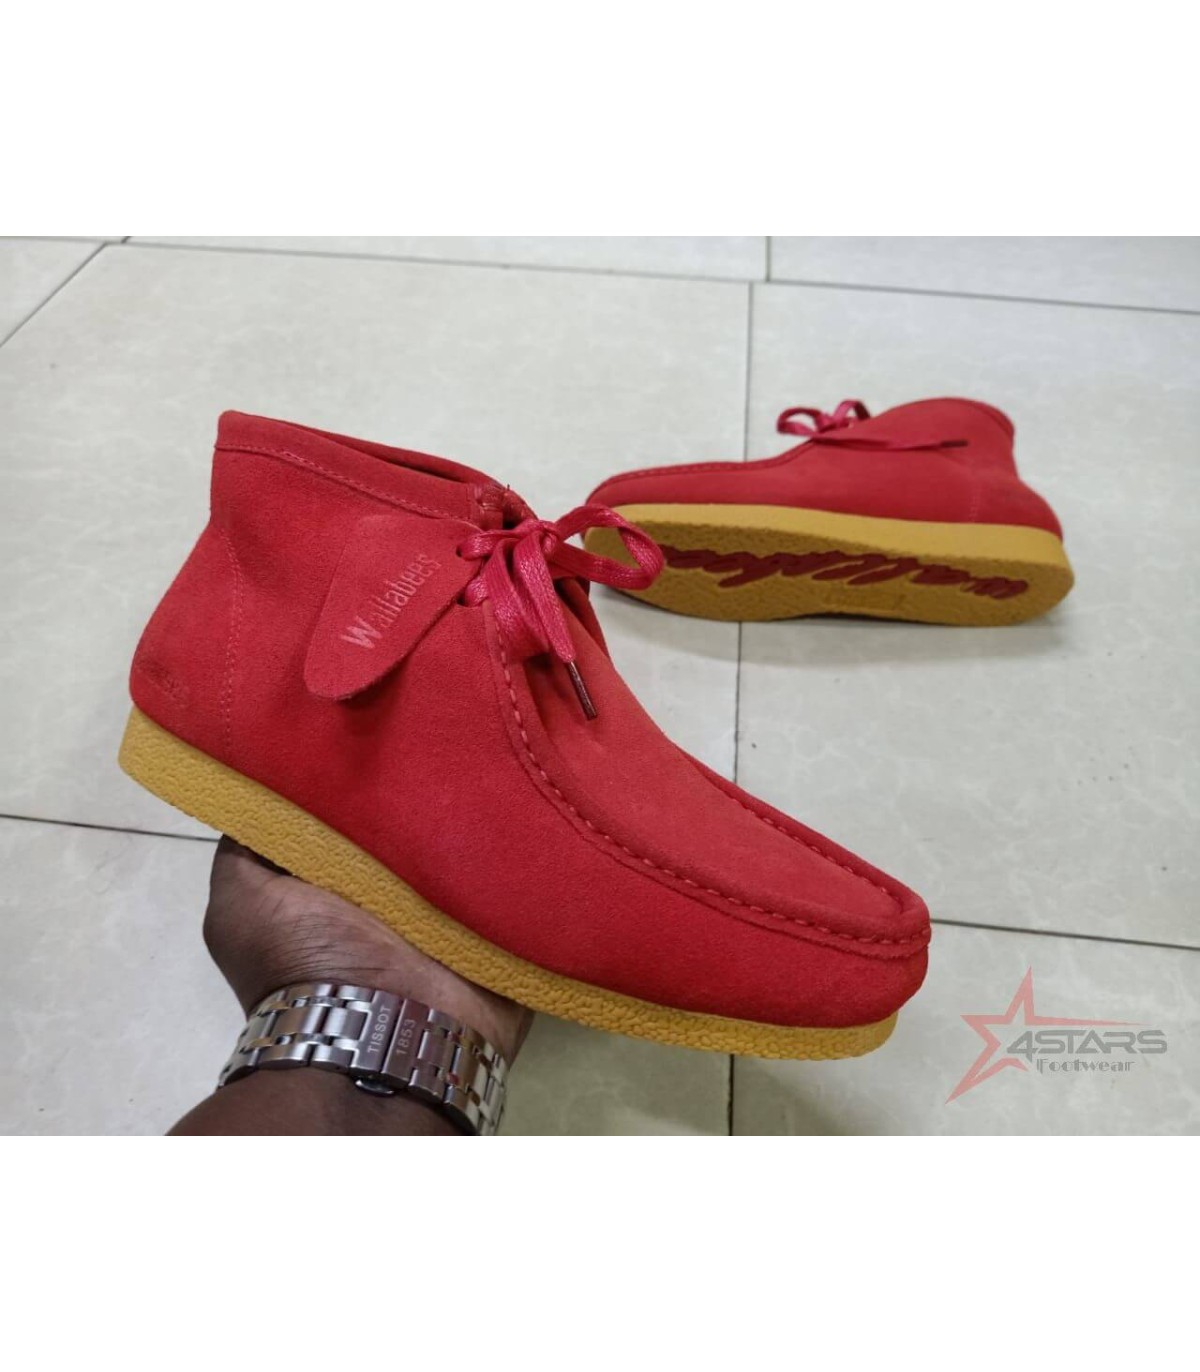 Clarks Wallabees High Tops - Red